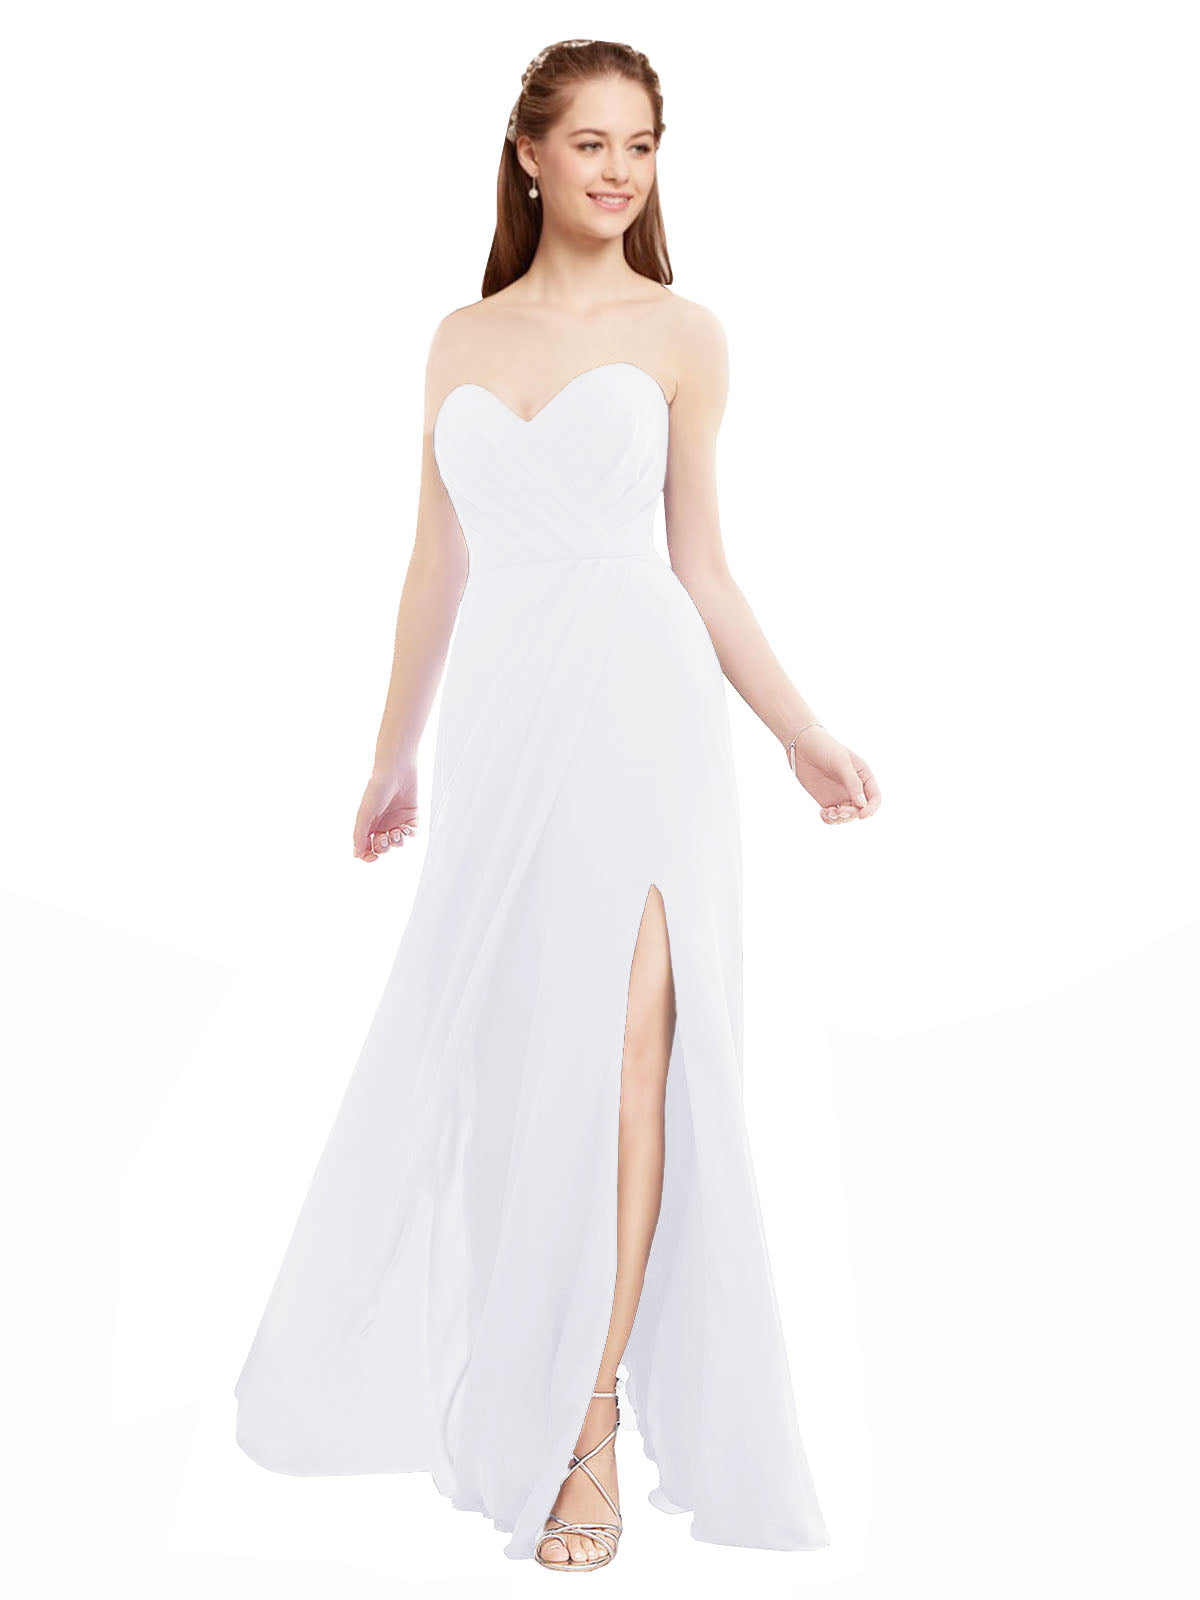 White A-Line Sweetheart Strapless Sleeveless Long Bridesmaid Dress Meadow